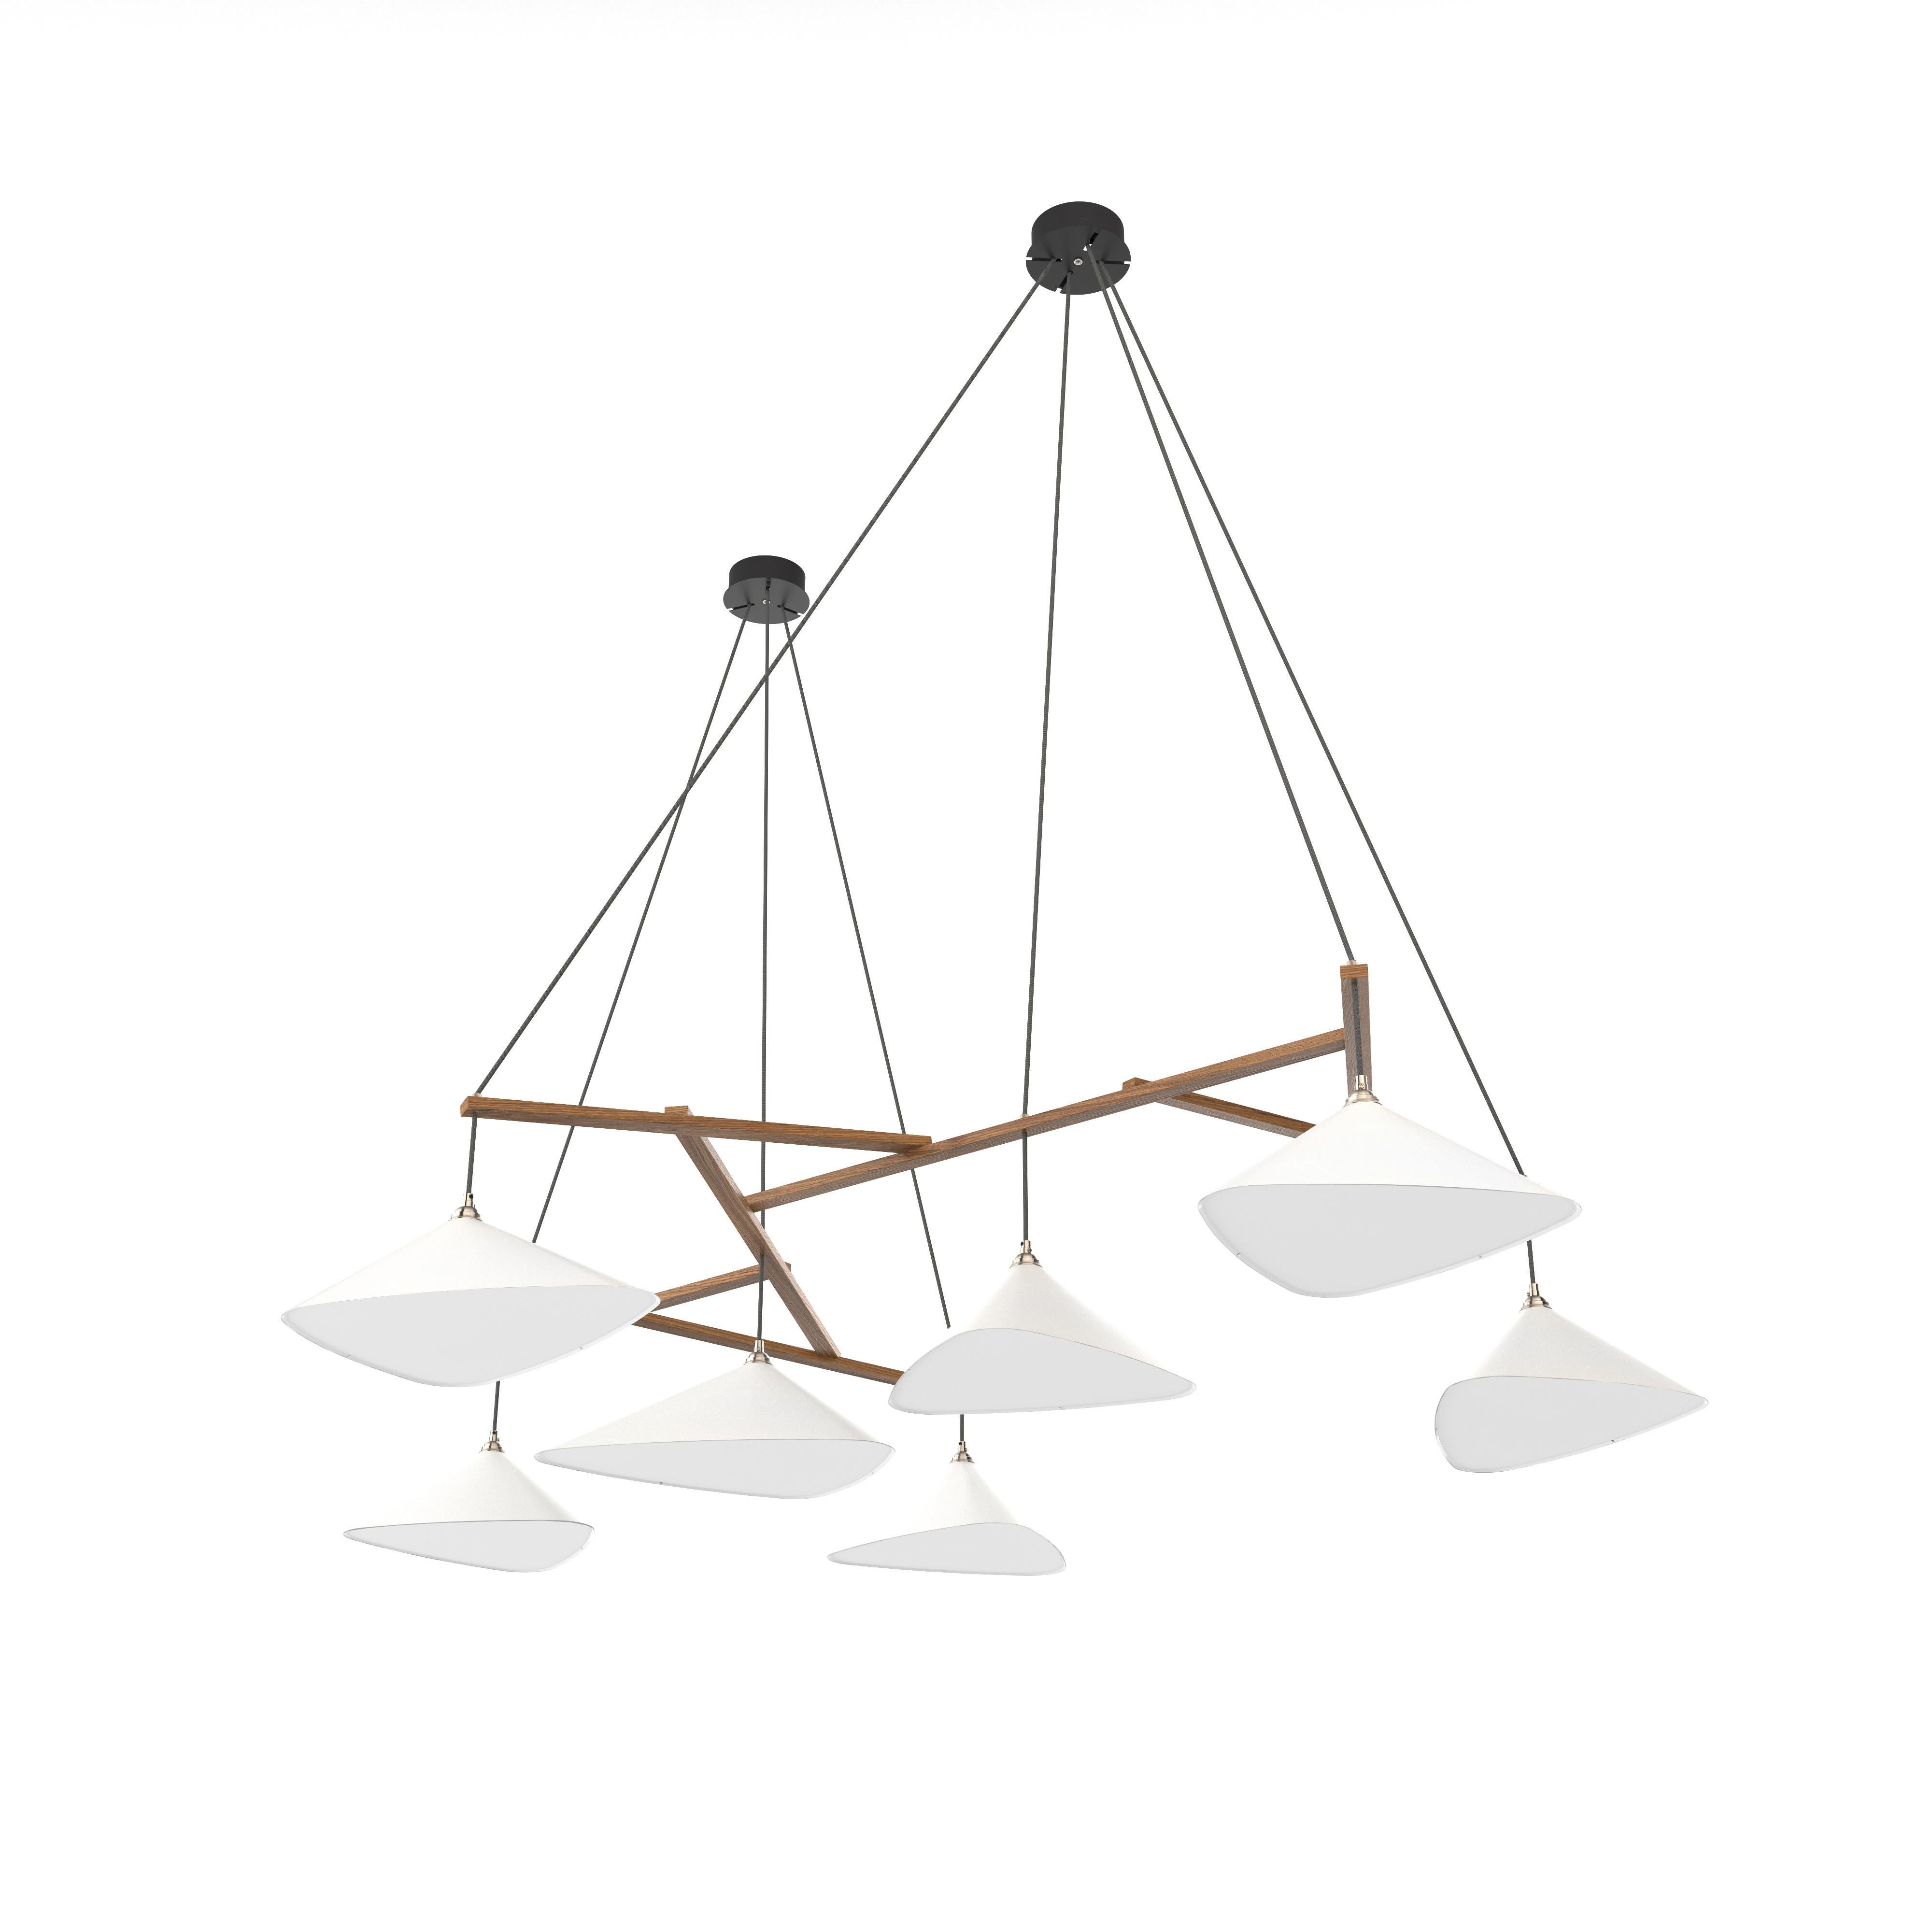 Monumental Daniel Becker 'Emily 7' Chandelier in White and Oak for Moss Objects. Designed by Berlin luminary Daniel Becker and handmade to order using modern and mid-century manufacturing techniques, the Emily Series won the prestigious German